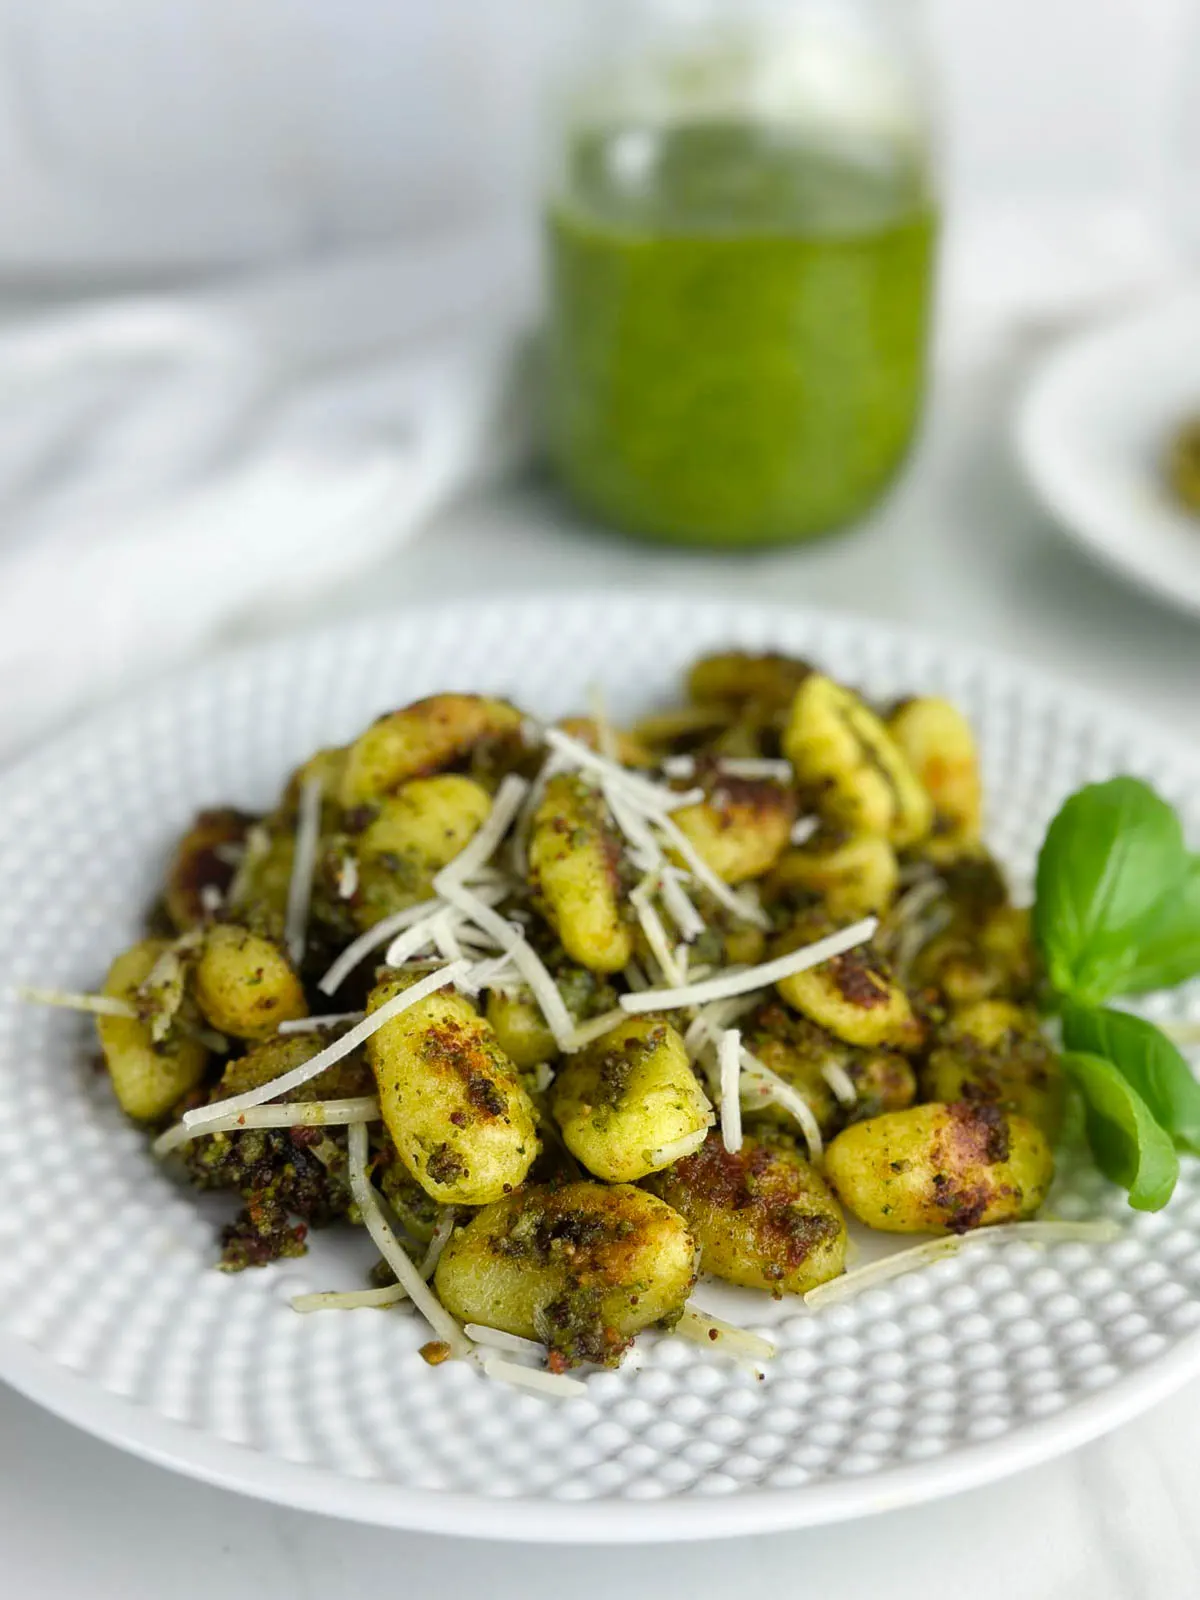 Baked gnocchi with pesto sauce features the Italian dumplings baked to crunchy perfection on a sheet pan before being tossed with fragrant pesto. Gnocchi and pesto sauce is an easy dinner any time.